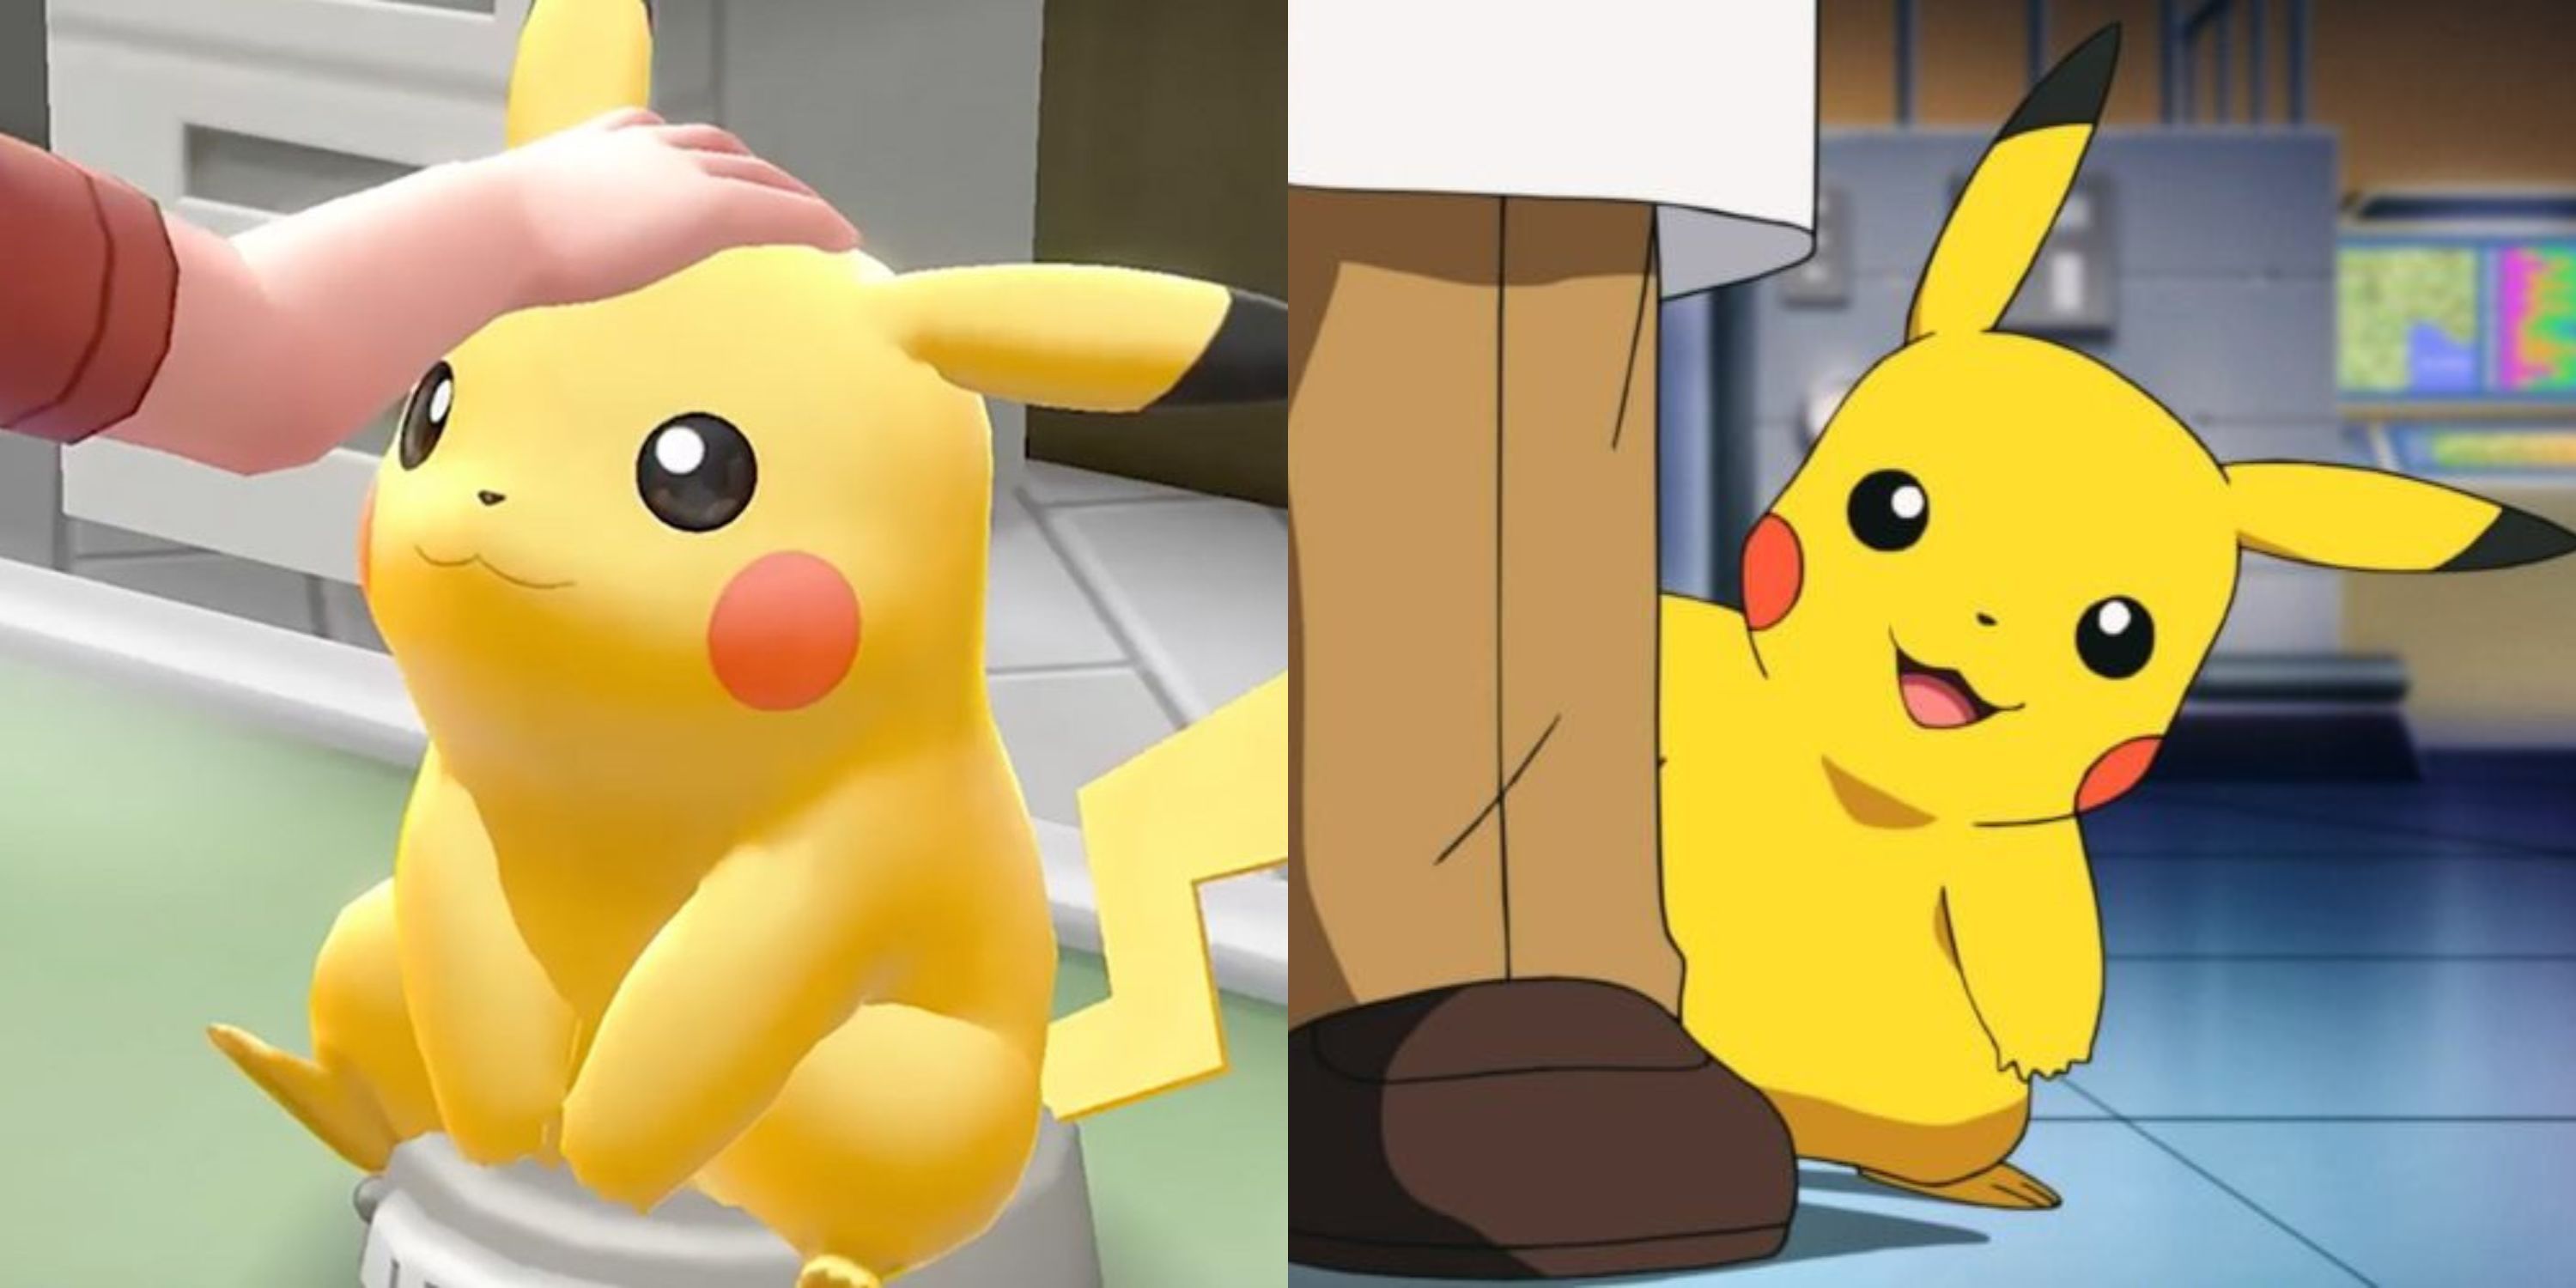 Featured image Pikachu from the Pokemon franchise